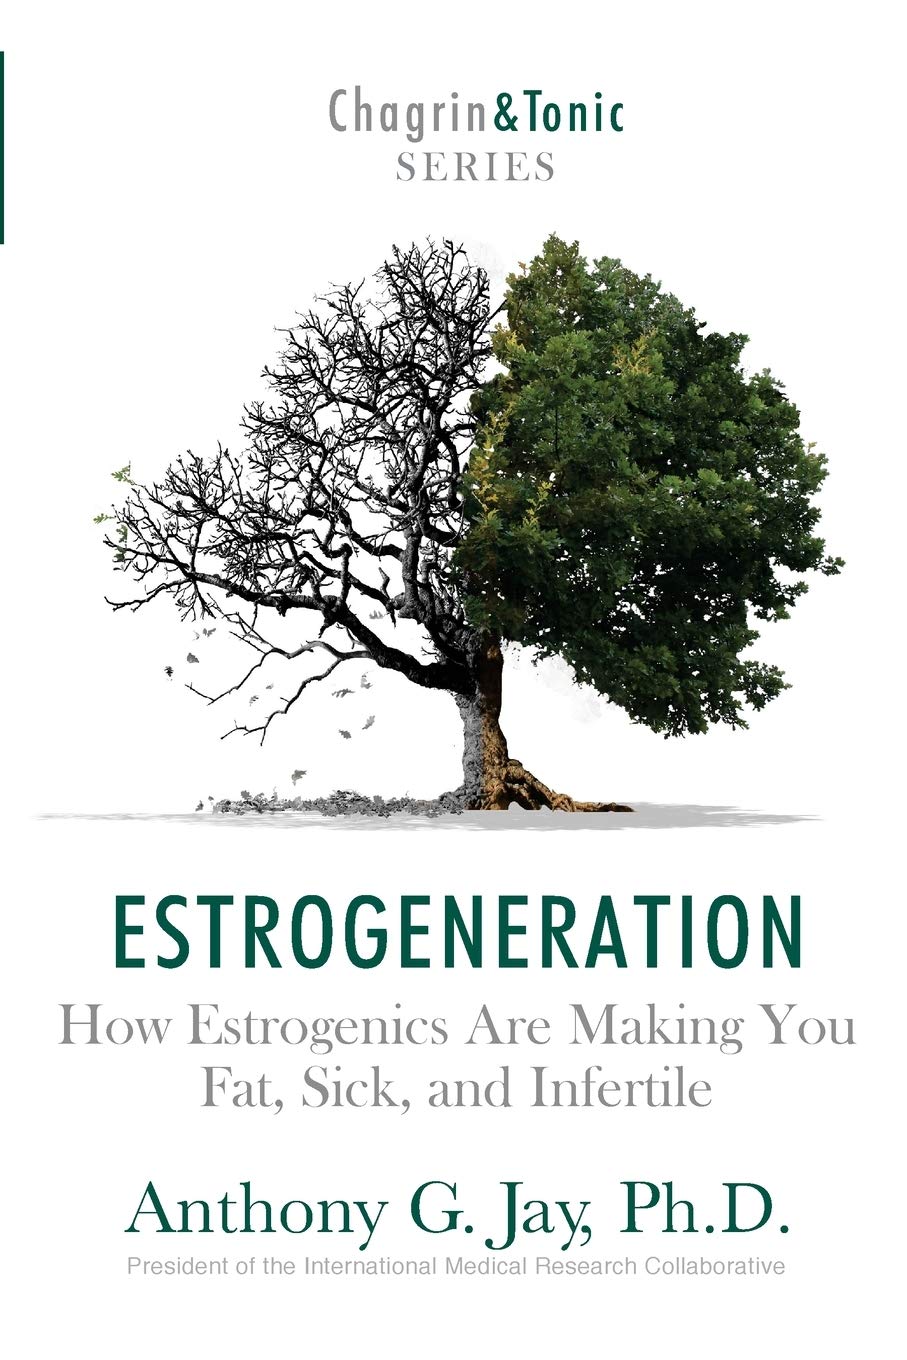 Estrogeneration: How Estrogenics Are Making You Fat, Sick, and Infertile (Chagrin and Tonic Series)